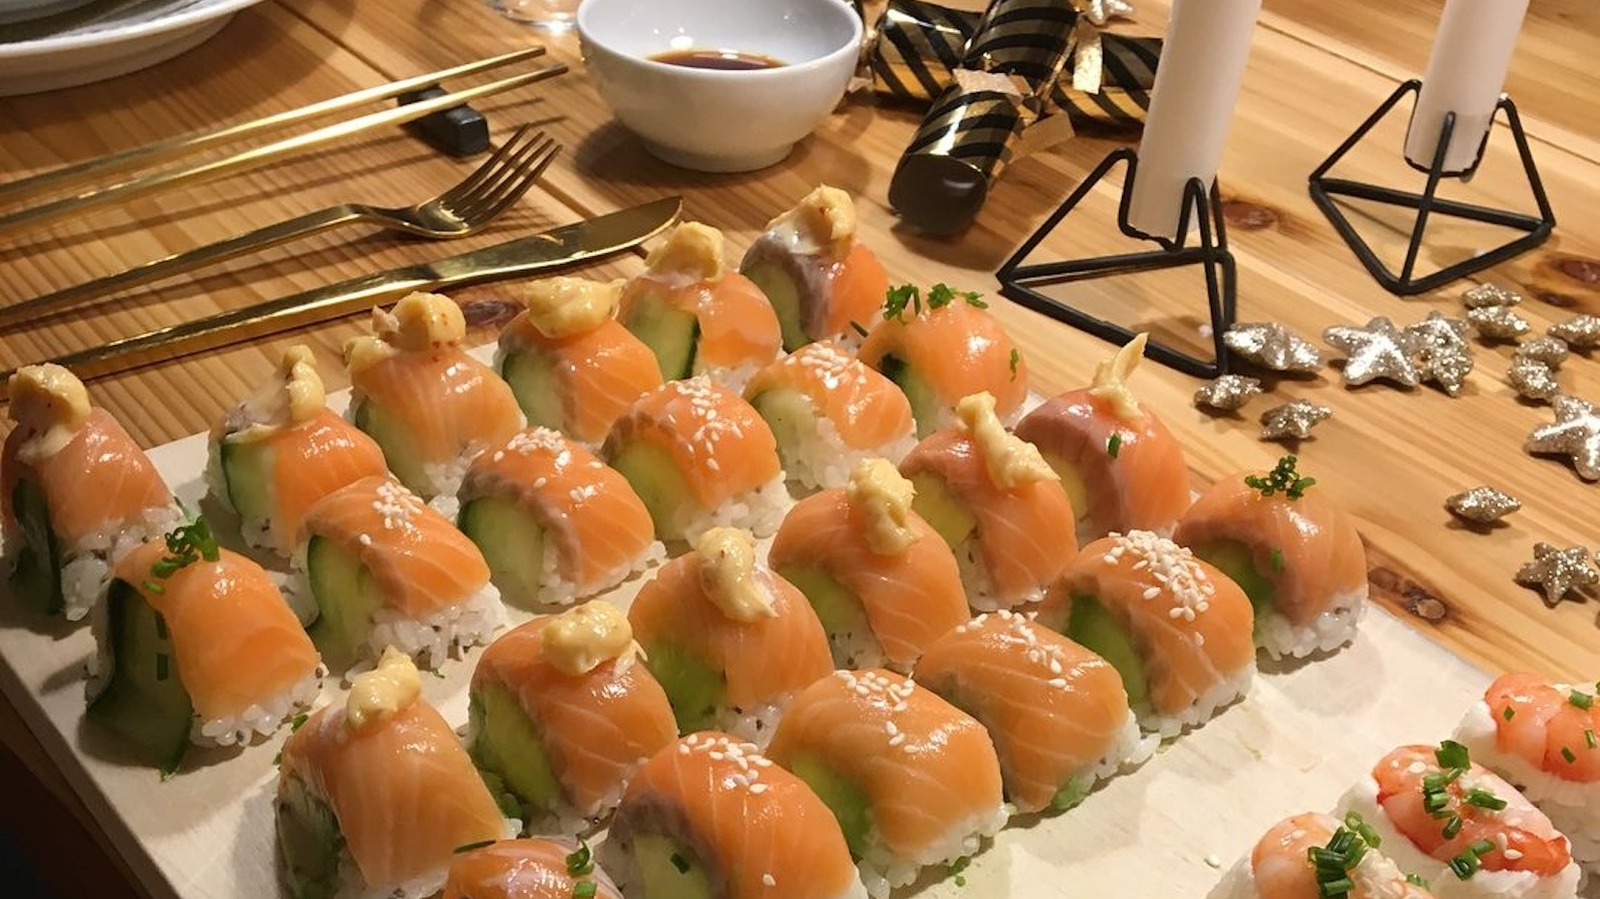 https://www.tastingtable.com/img/gallery/craft-perfect-pieces-of-homemade-sushi-using-an-ice-cube-tray/l-intro-1691761914.jpg